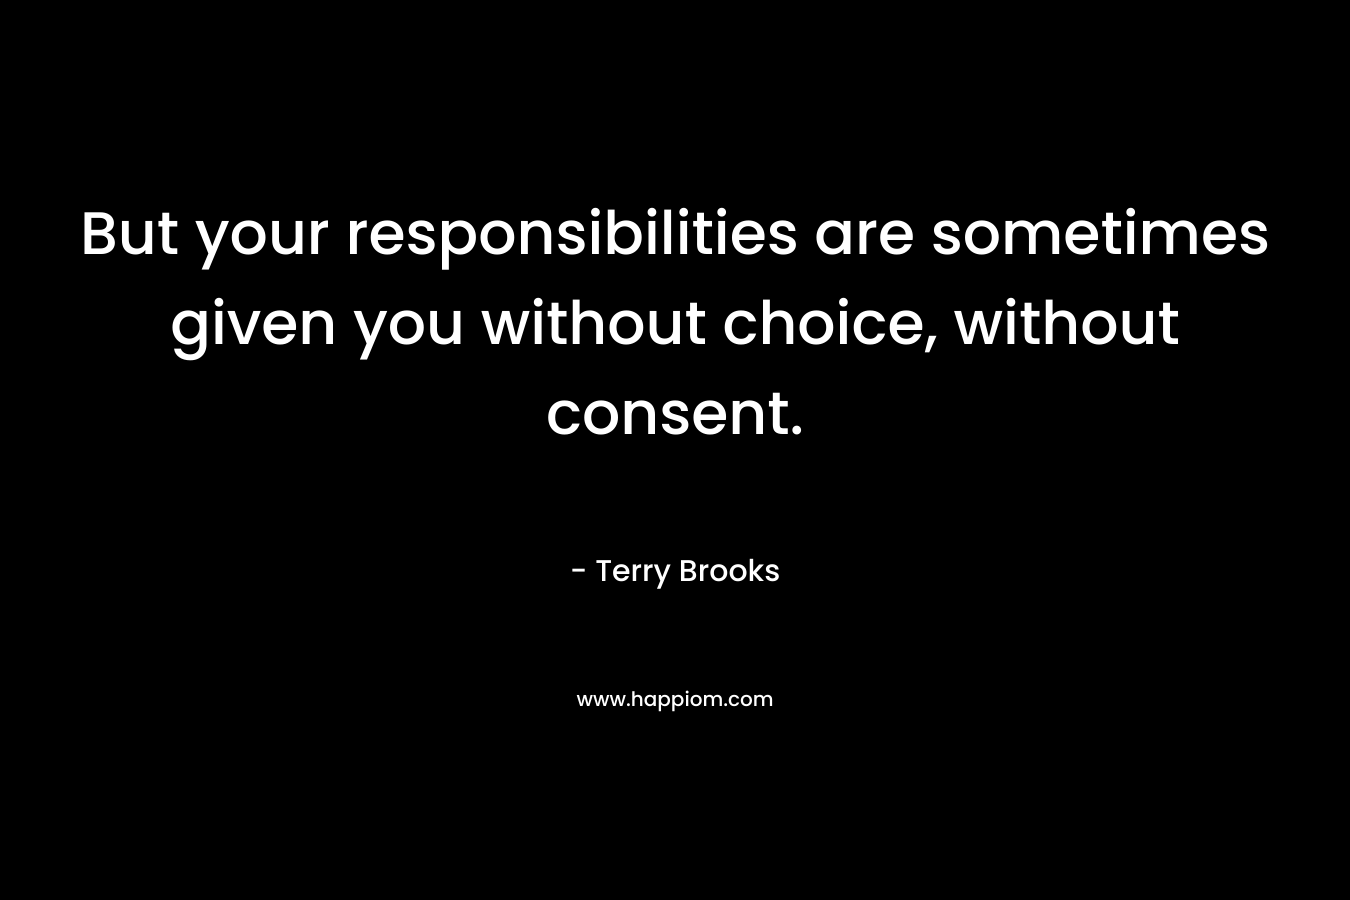 But your responsibilities are sometimes given you without choice, without consent. – Terry Brooks